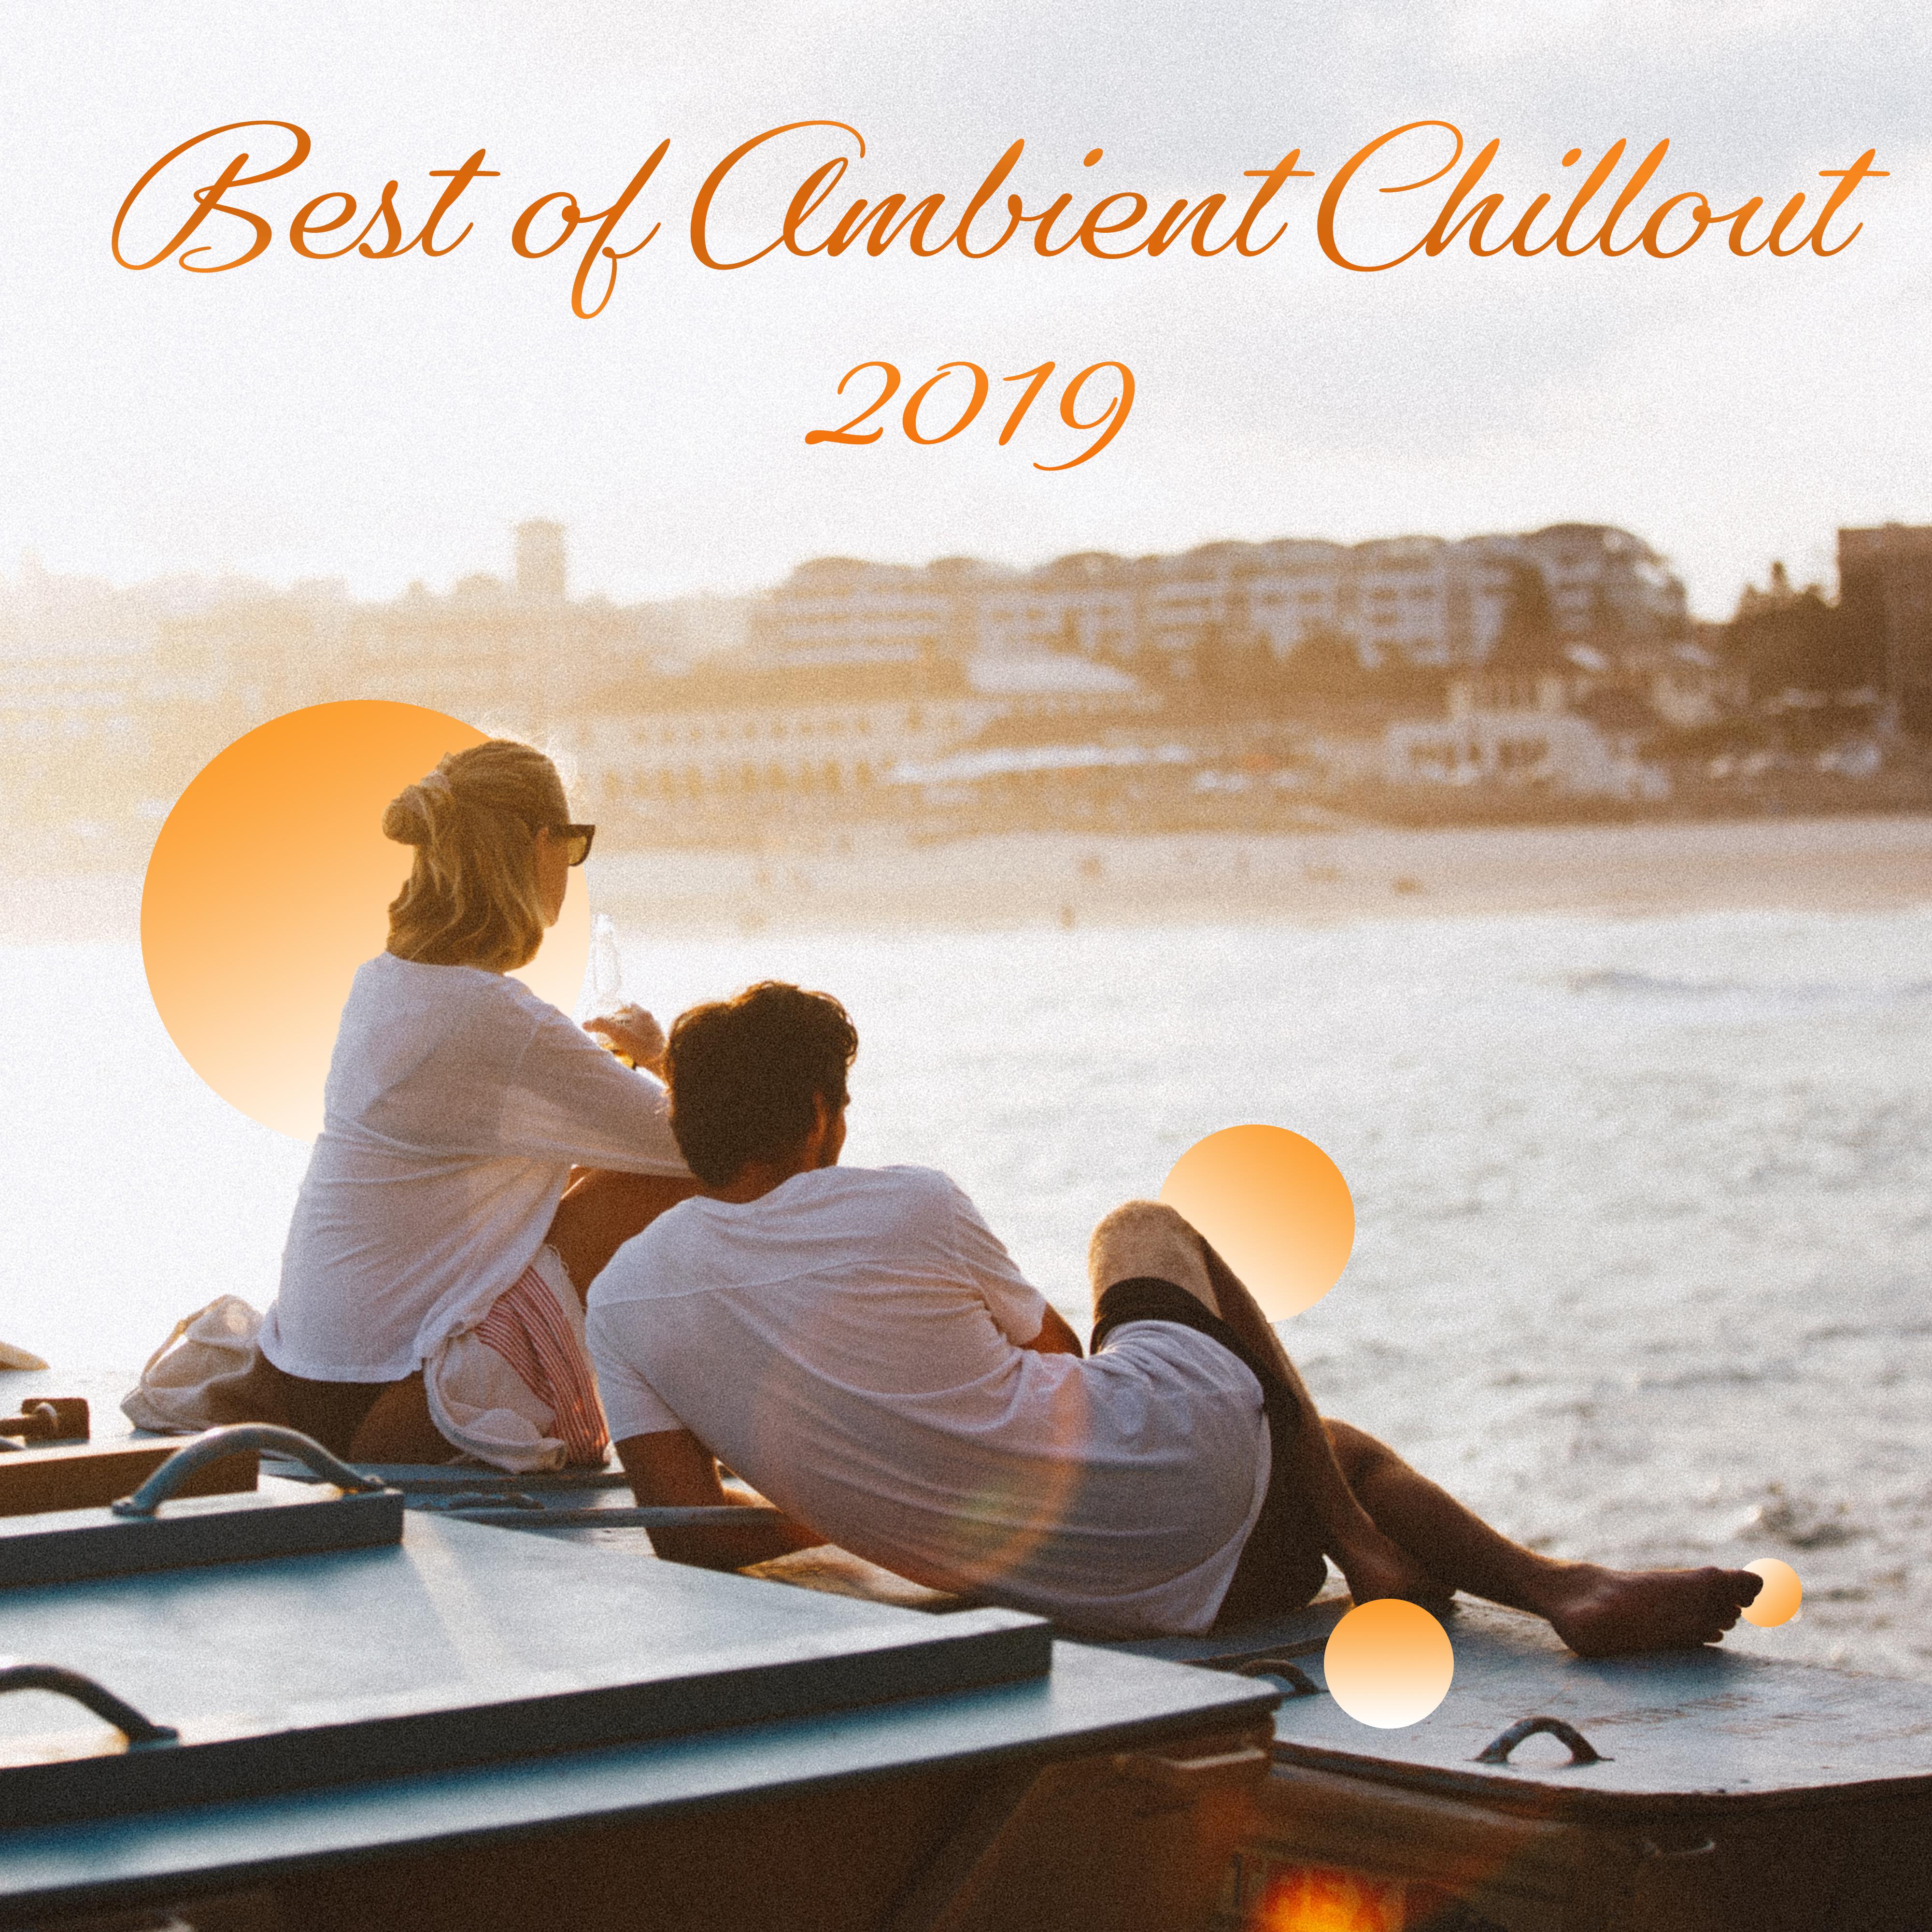 Best of Ambient Chillout 2019  Ibiza Lounge, Exotic Lounge Collection, Summertime 2019, Beach Party, Total Chillout Mix, Relaxing Music, Zen Chillout